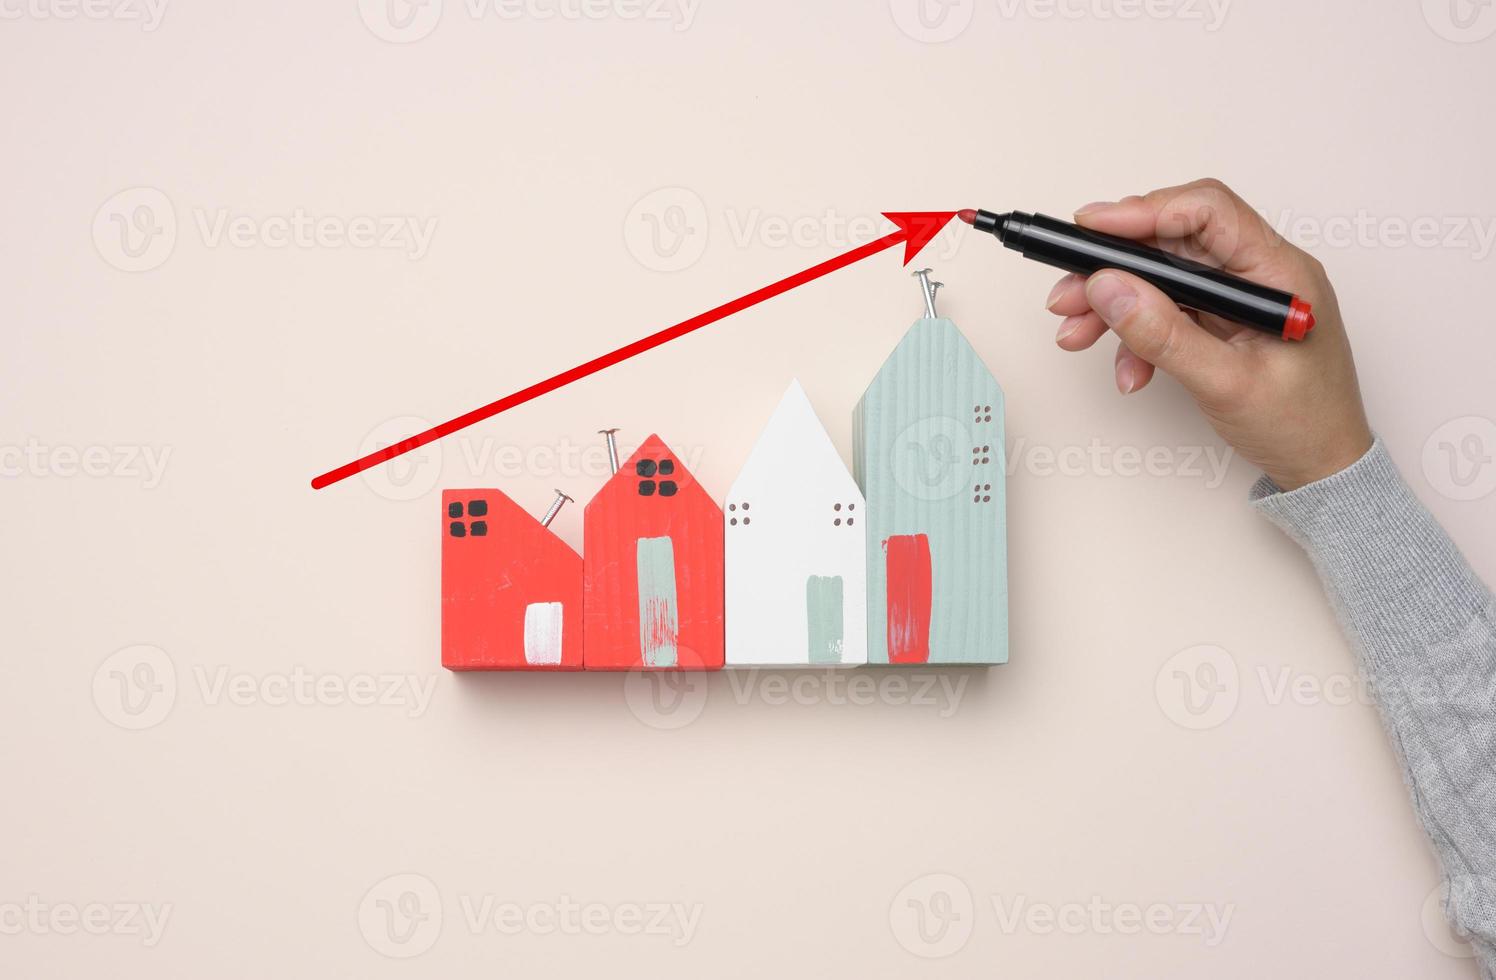 A miniature wooden house and a woman's hand draws a graph with growing indicators. photo